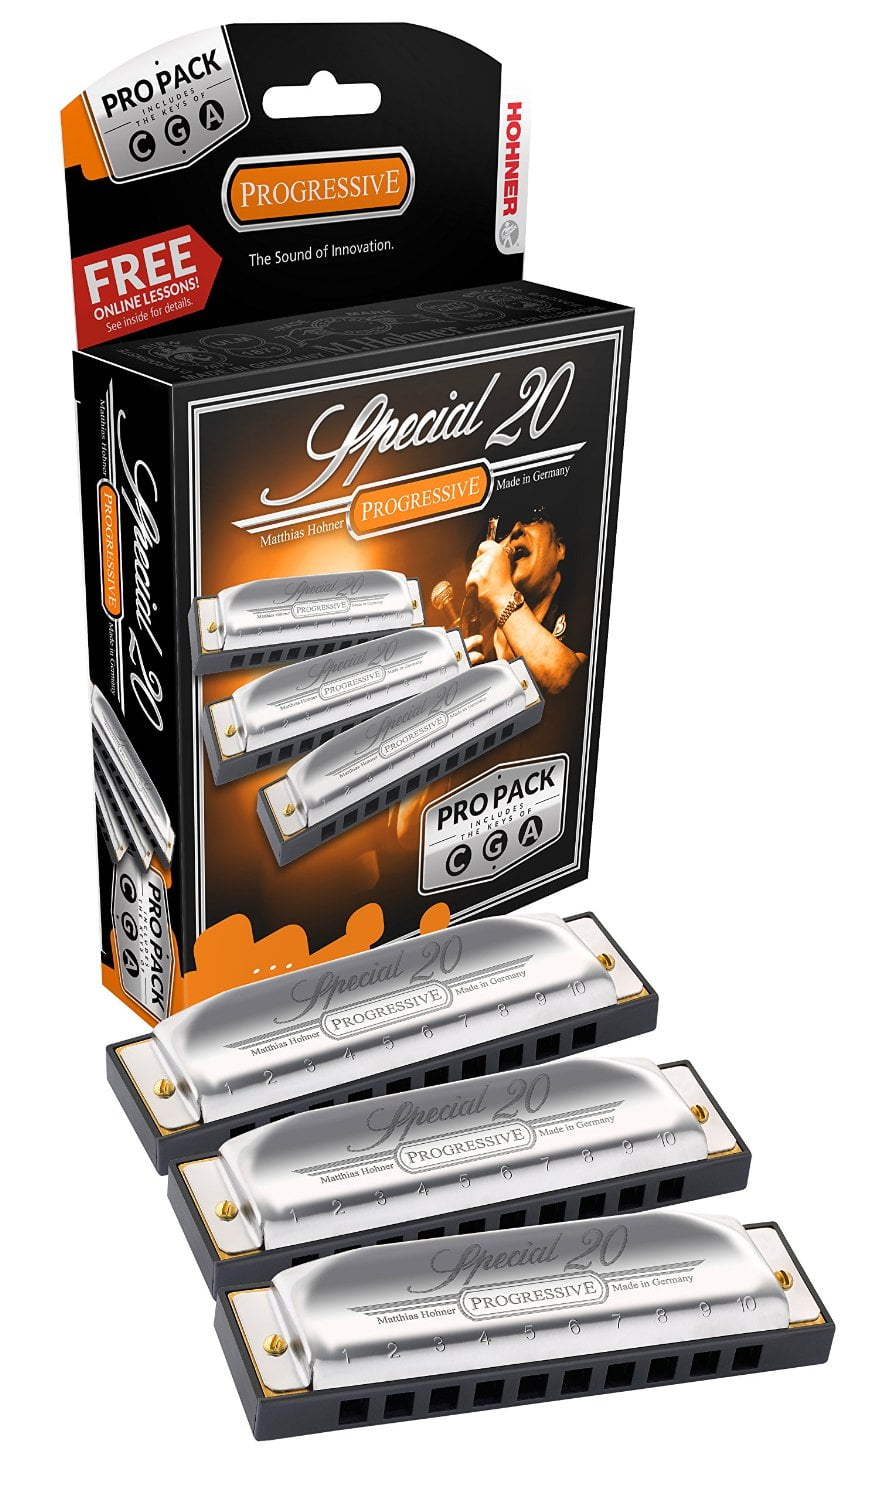 Hohner Special 20 Harmonica Key of C 